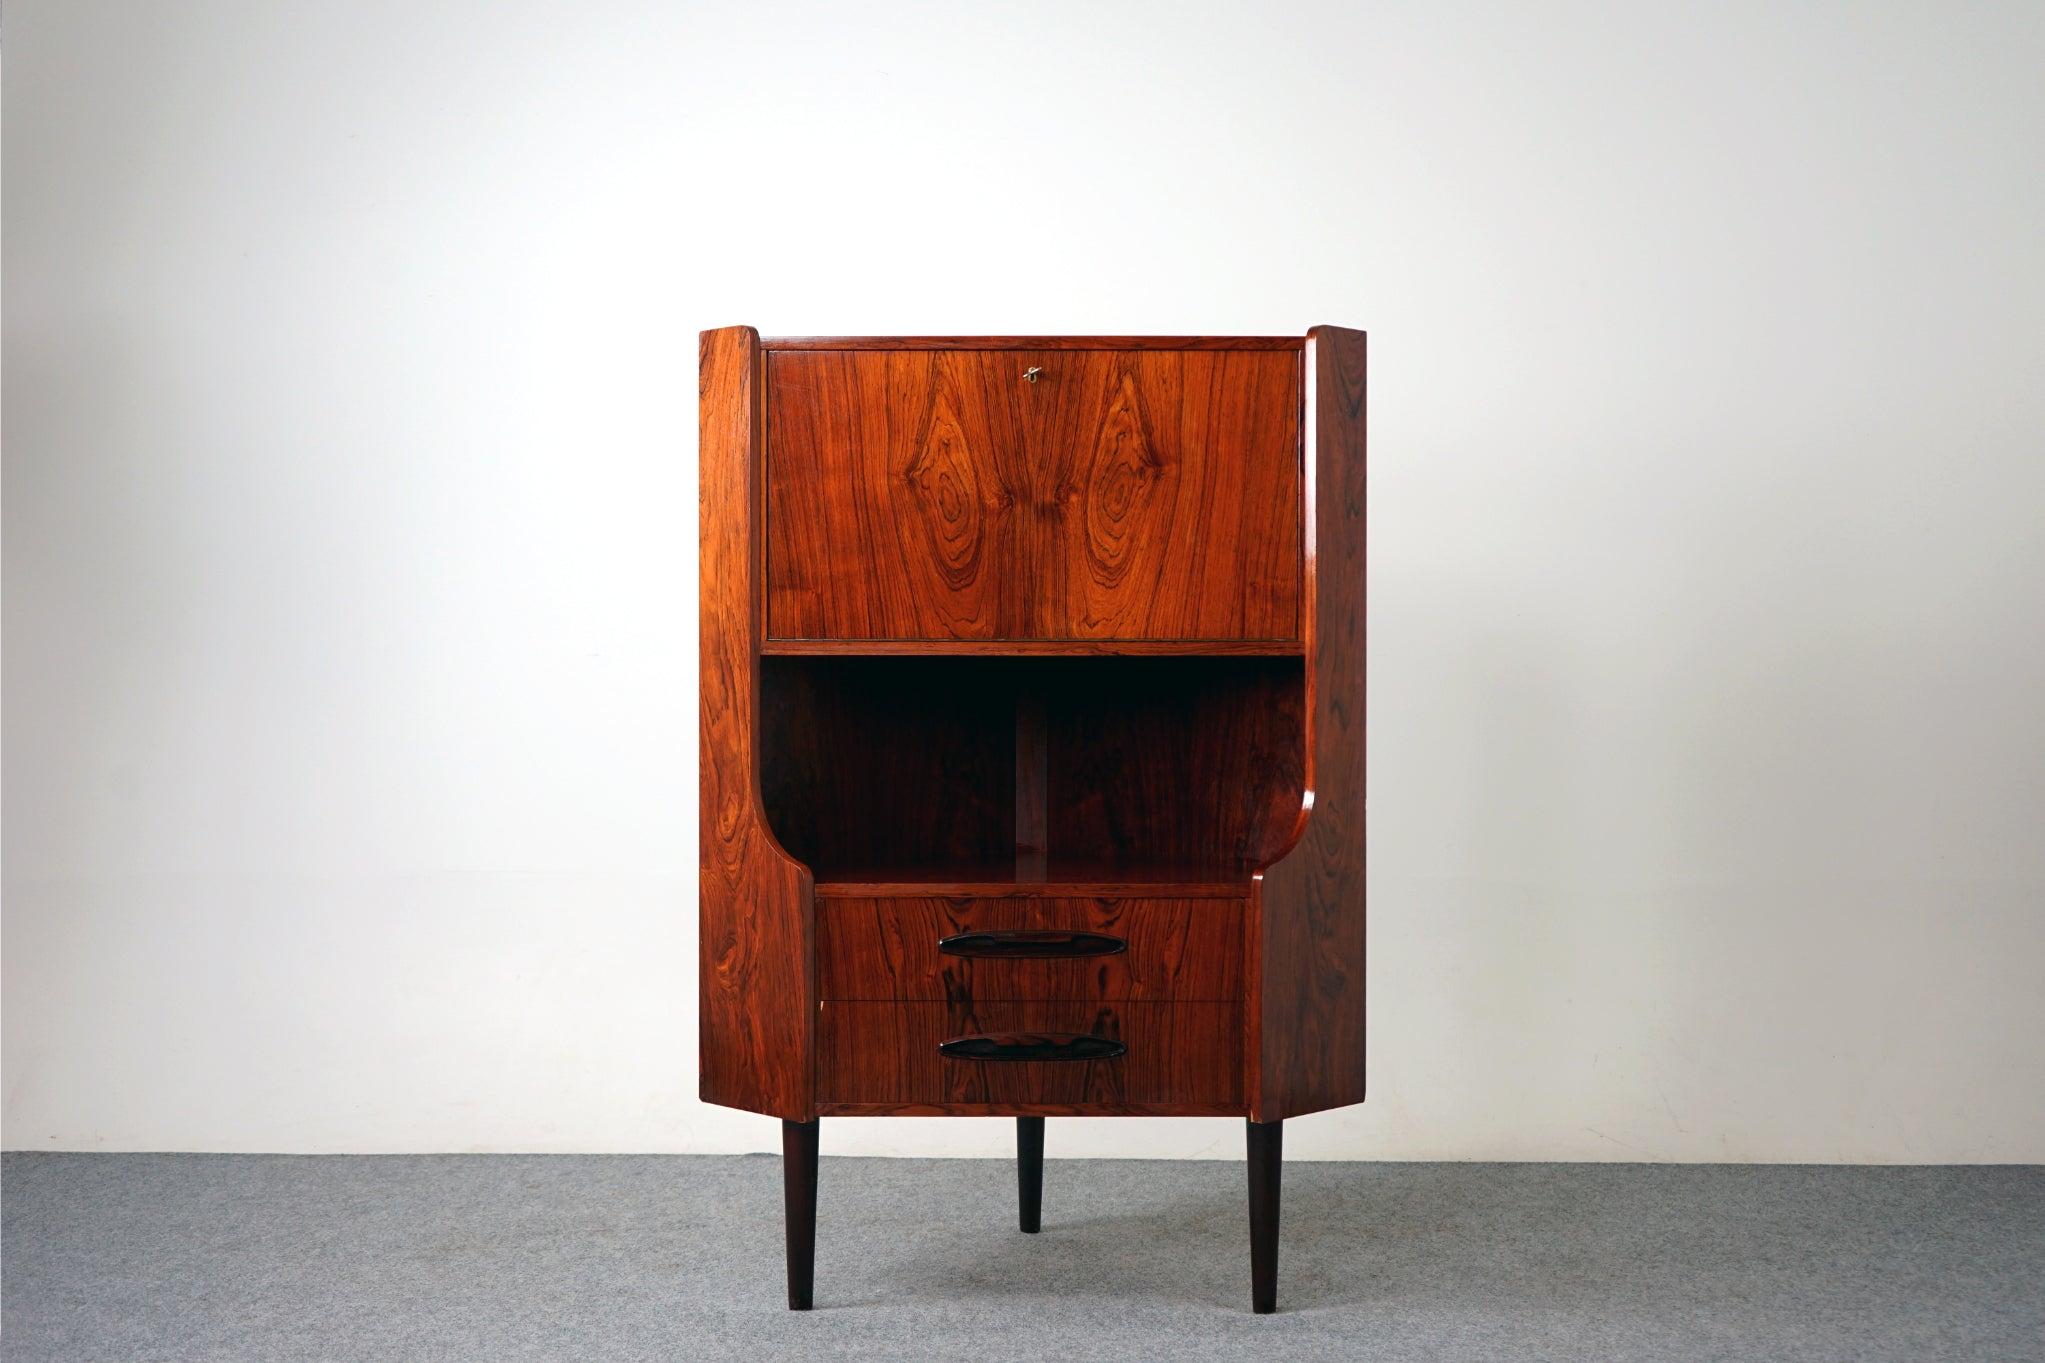 Rosewood corner cabinet, circa 1960's. Top section drops down to reveal interior shelving, bottom section consists of two drawers with dovetail construction. Back of piece shows 